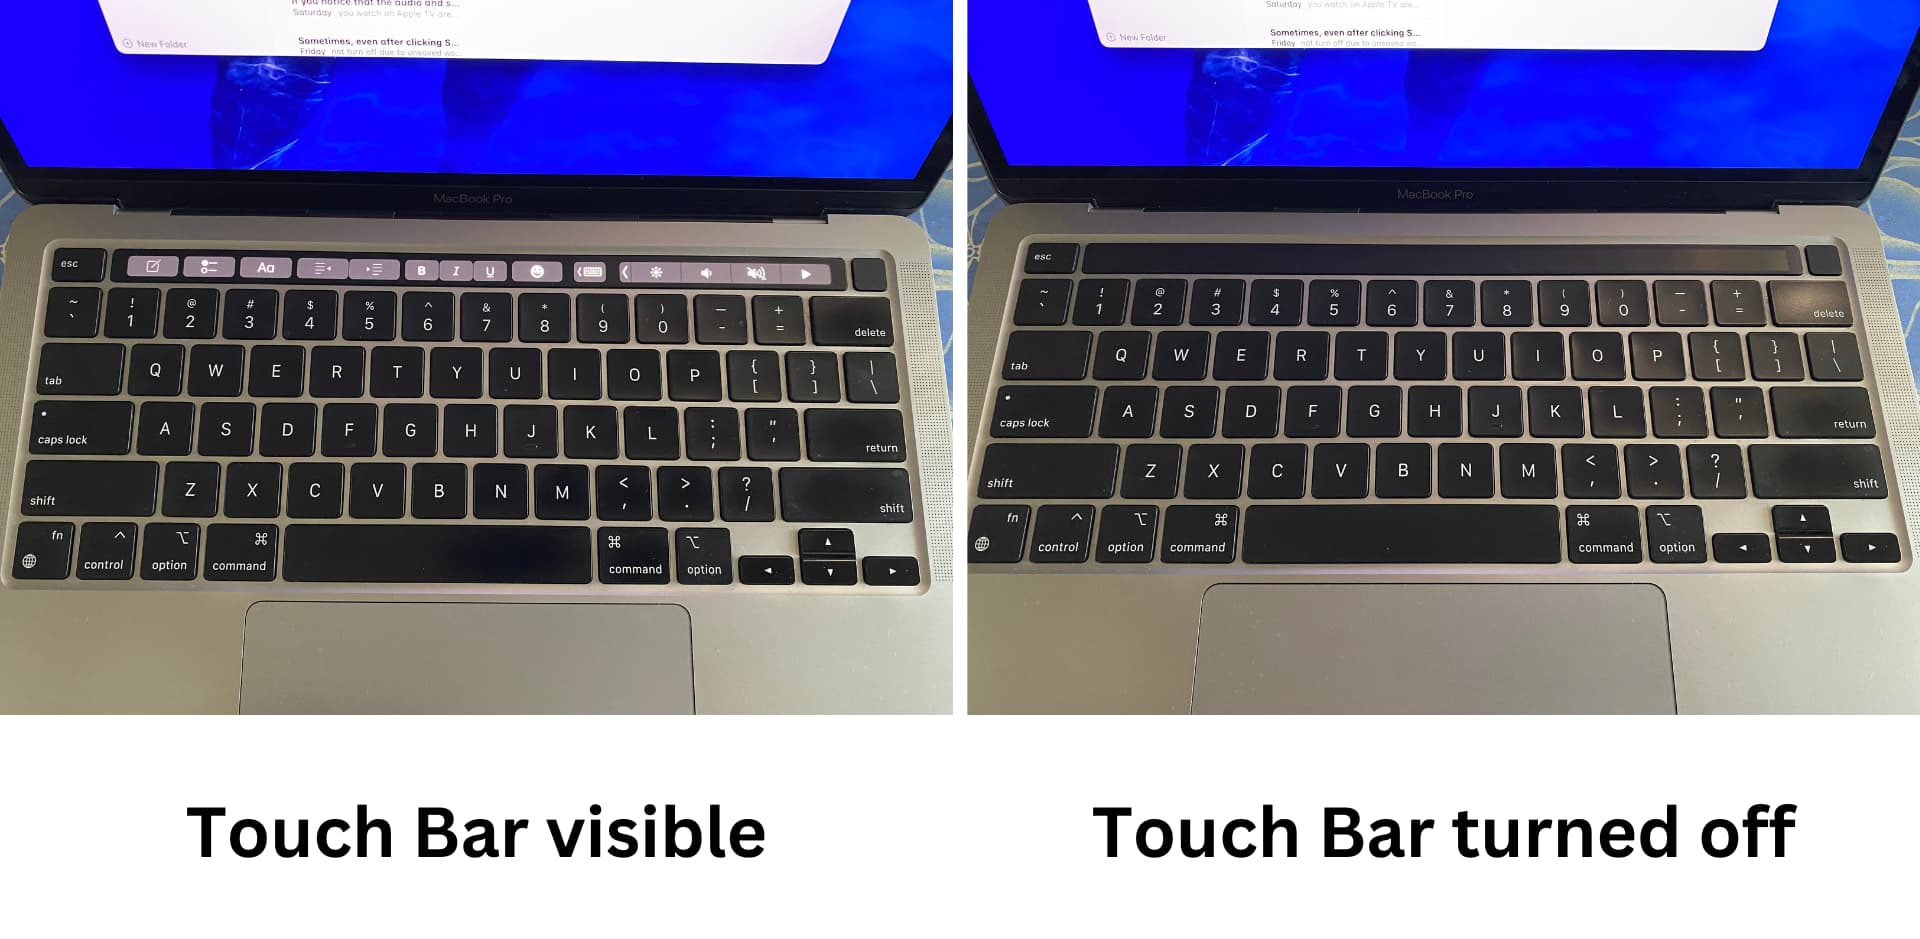 Two MacBook Pro images with one showing the active Touch Bar with its buttons and one with Touch Bar disabled